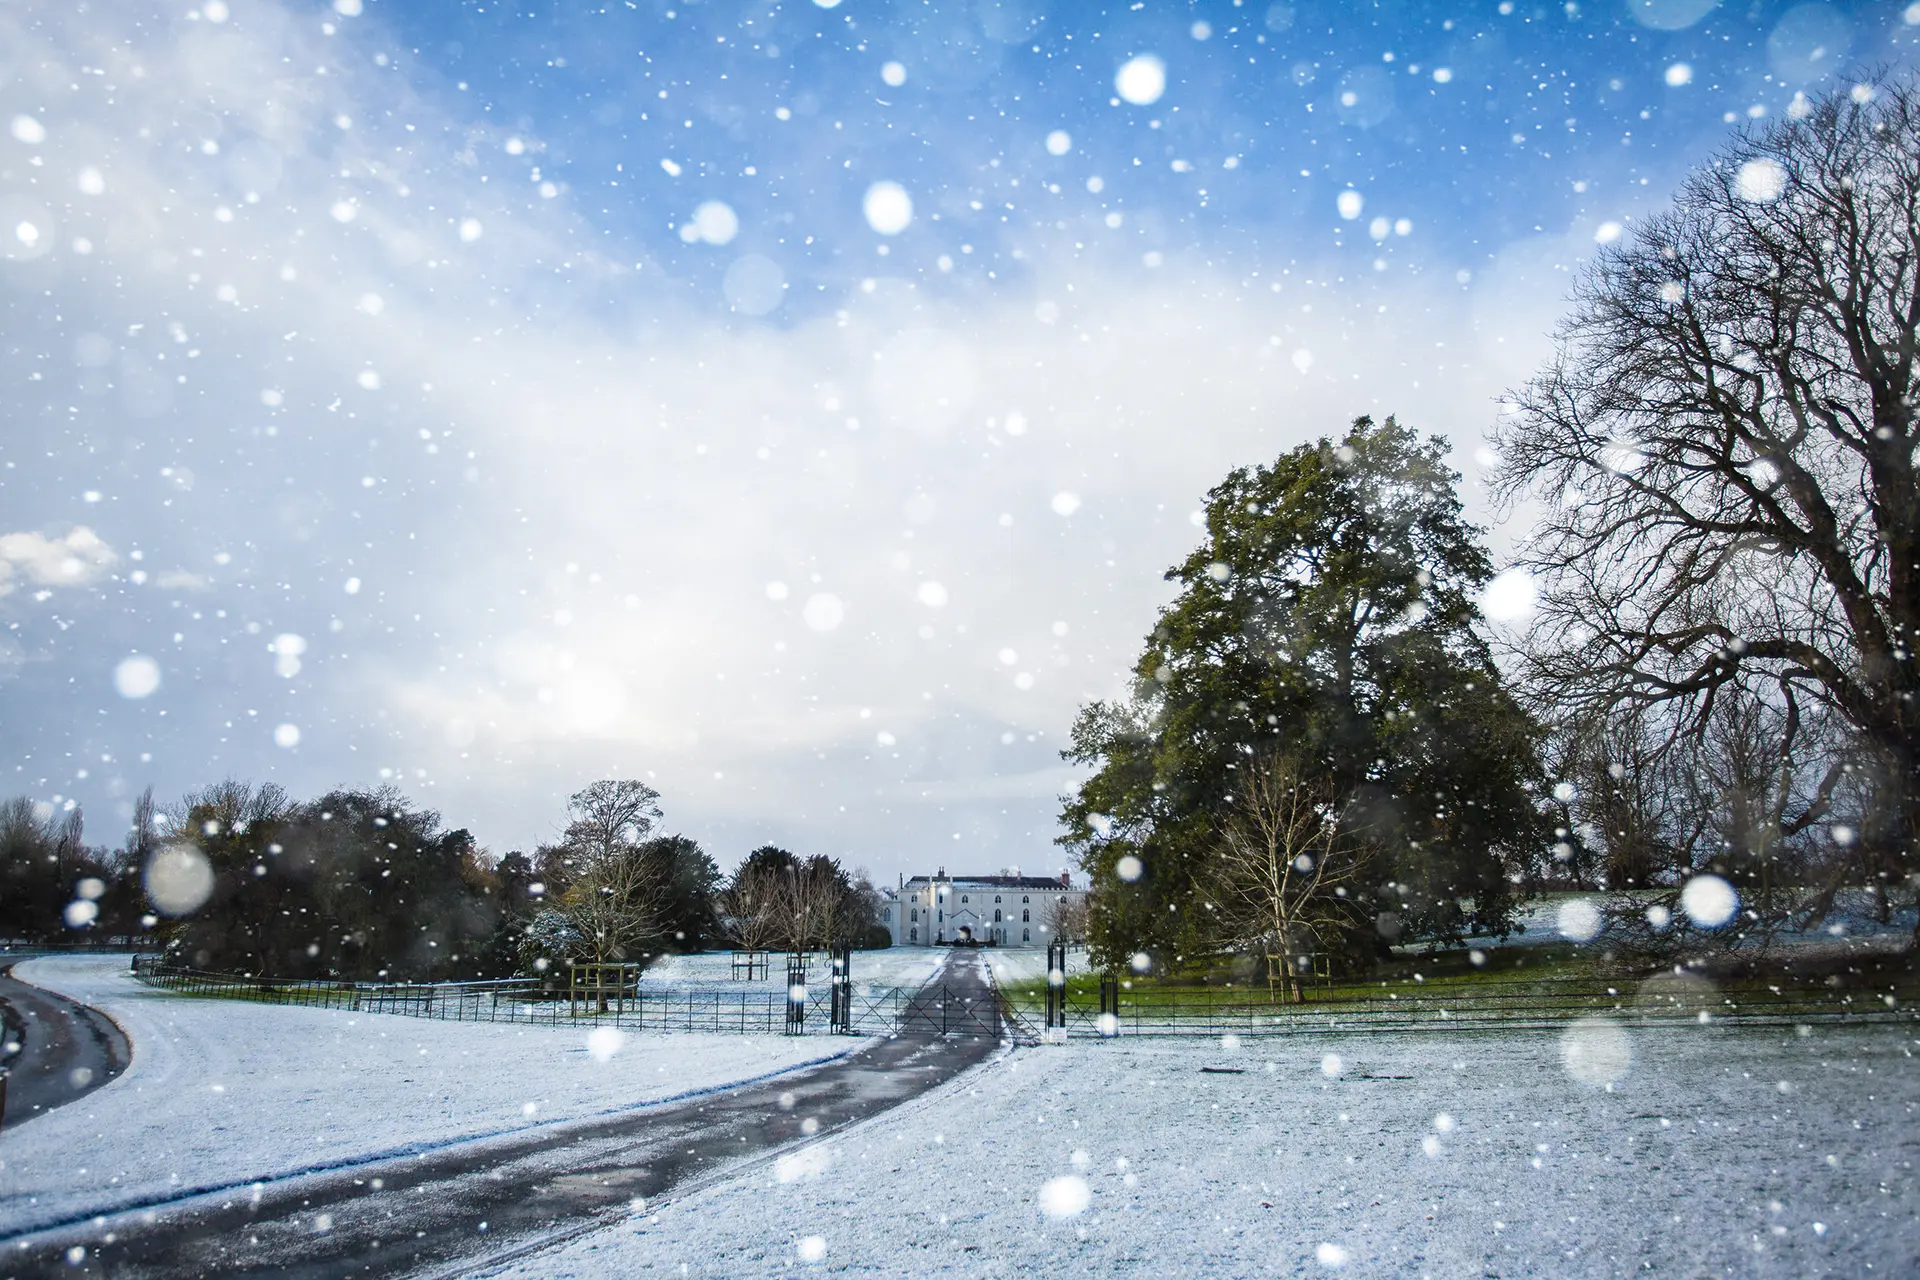 snow scene at combermere abbey